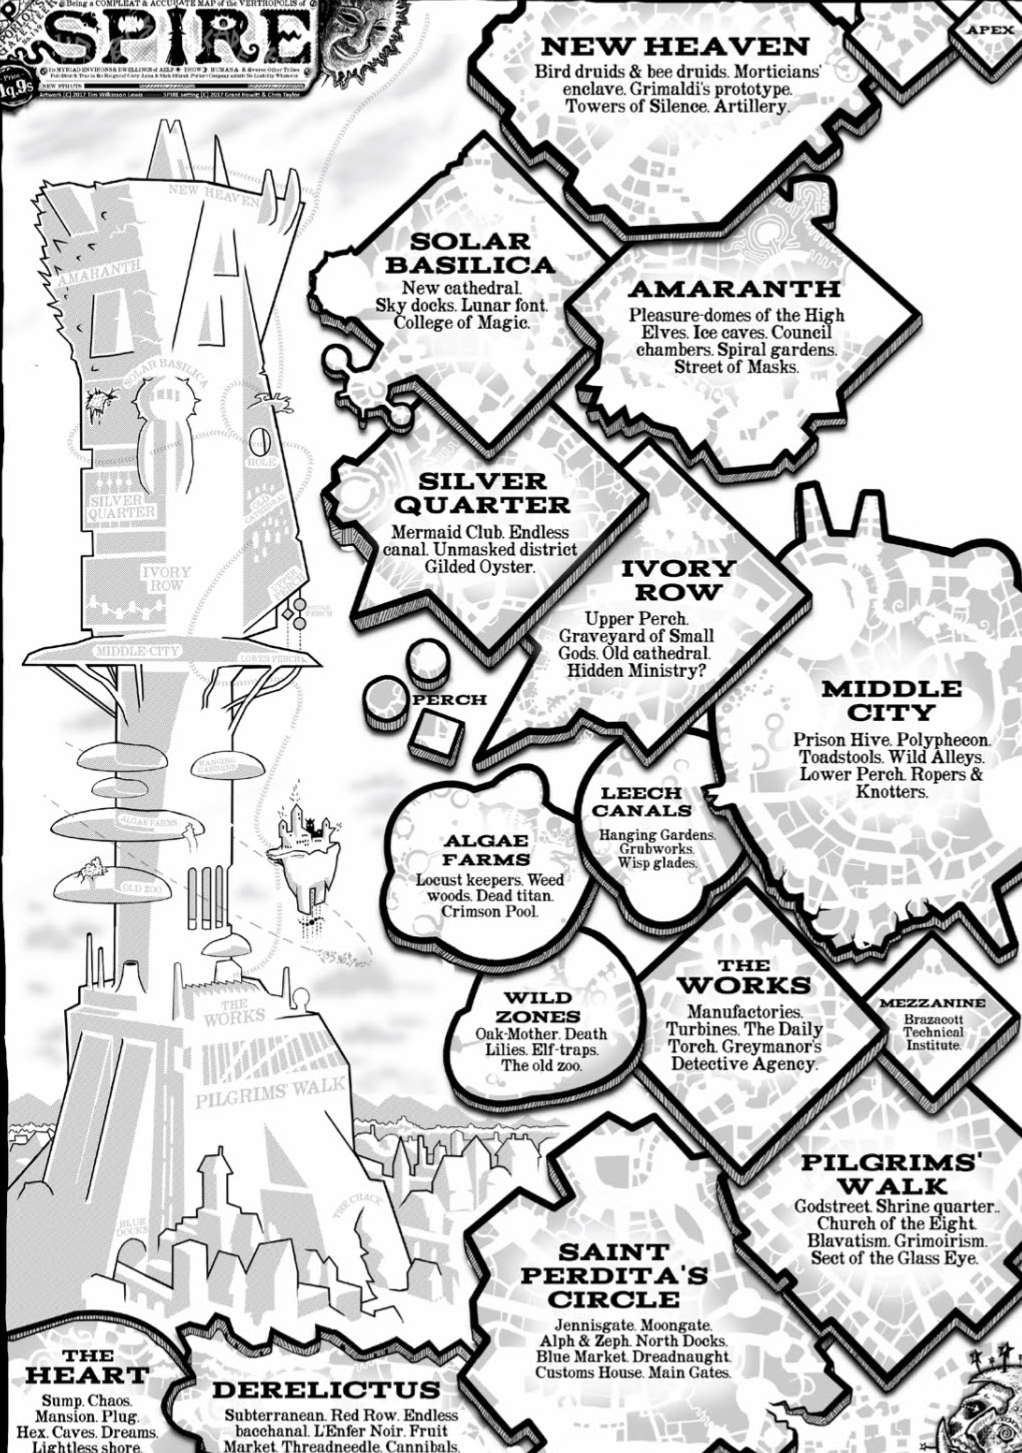 An overview of the Spire districts.